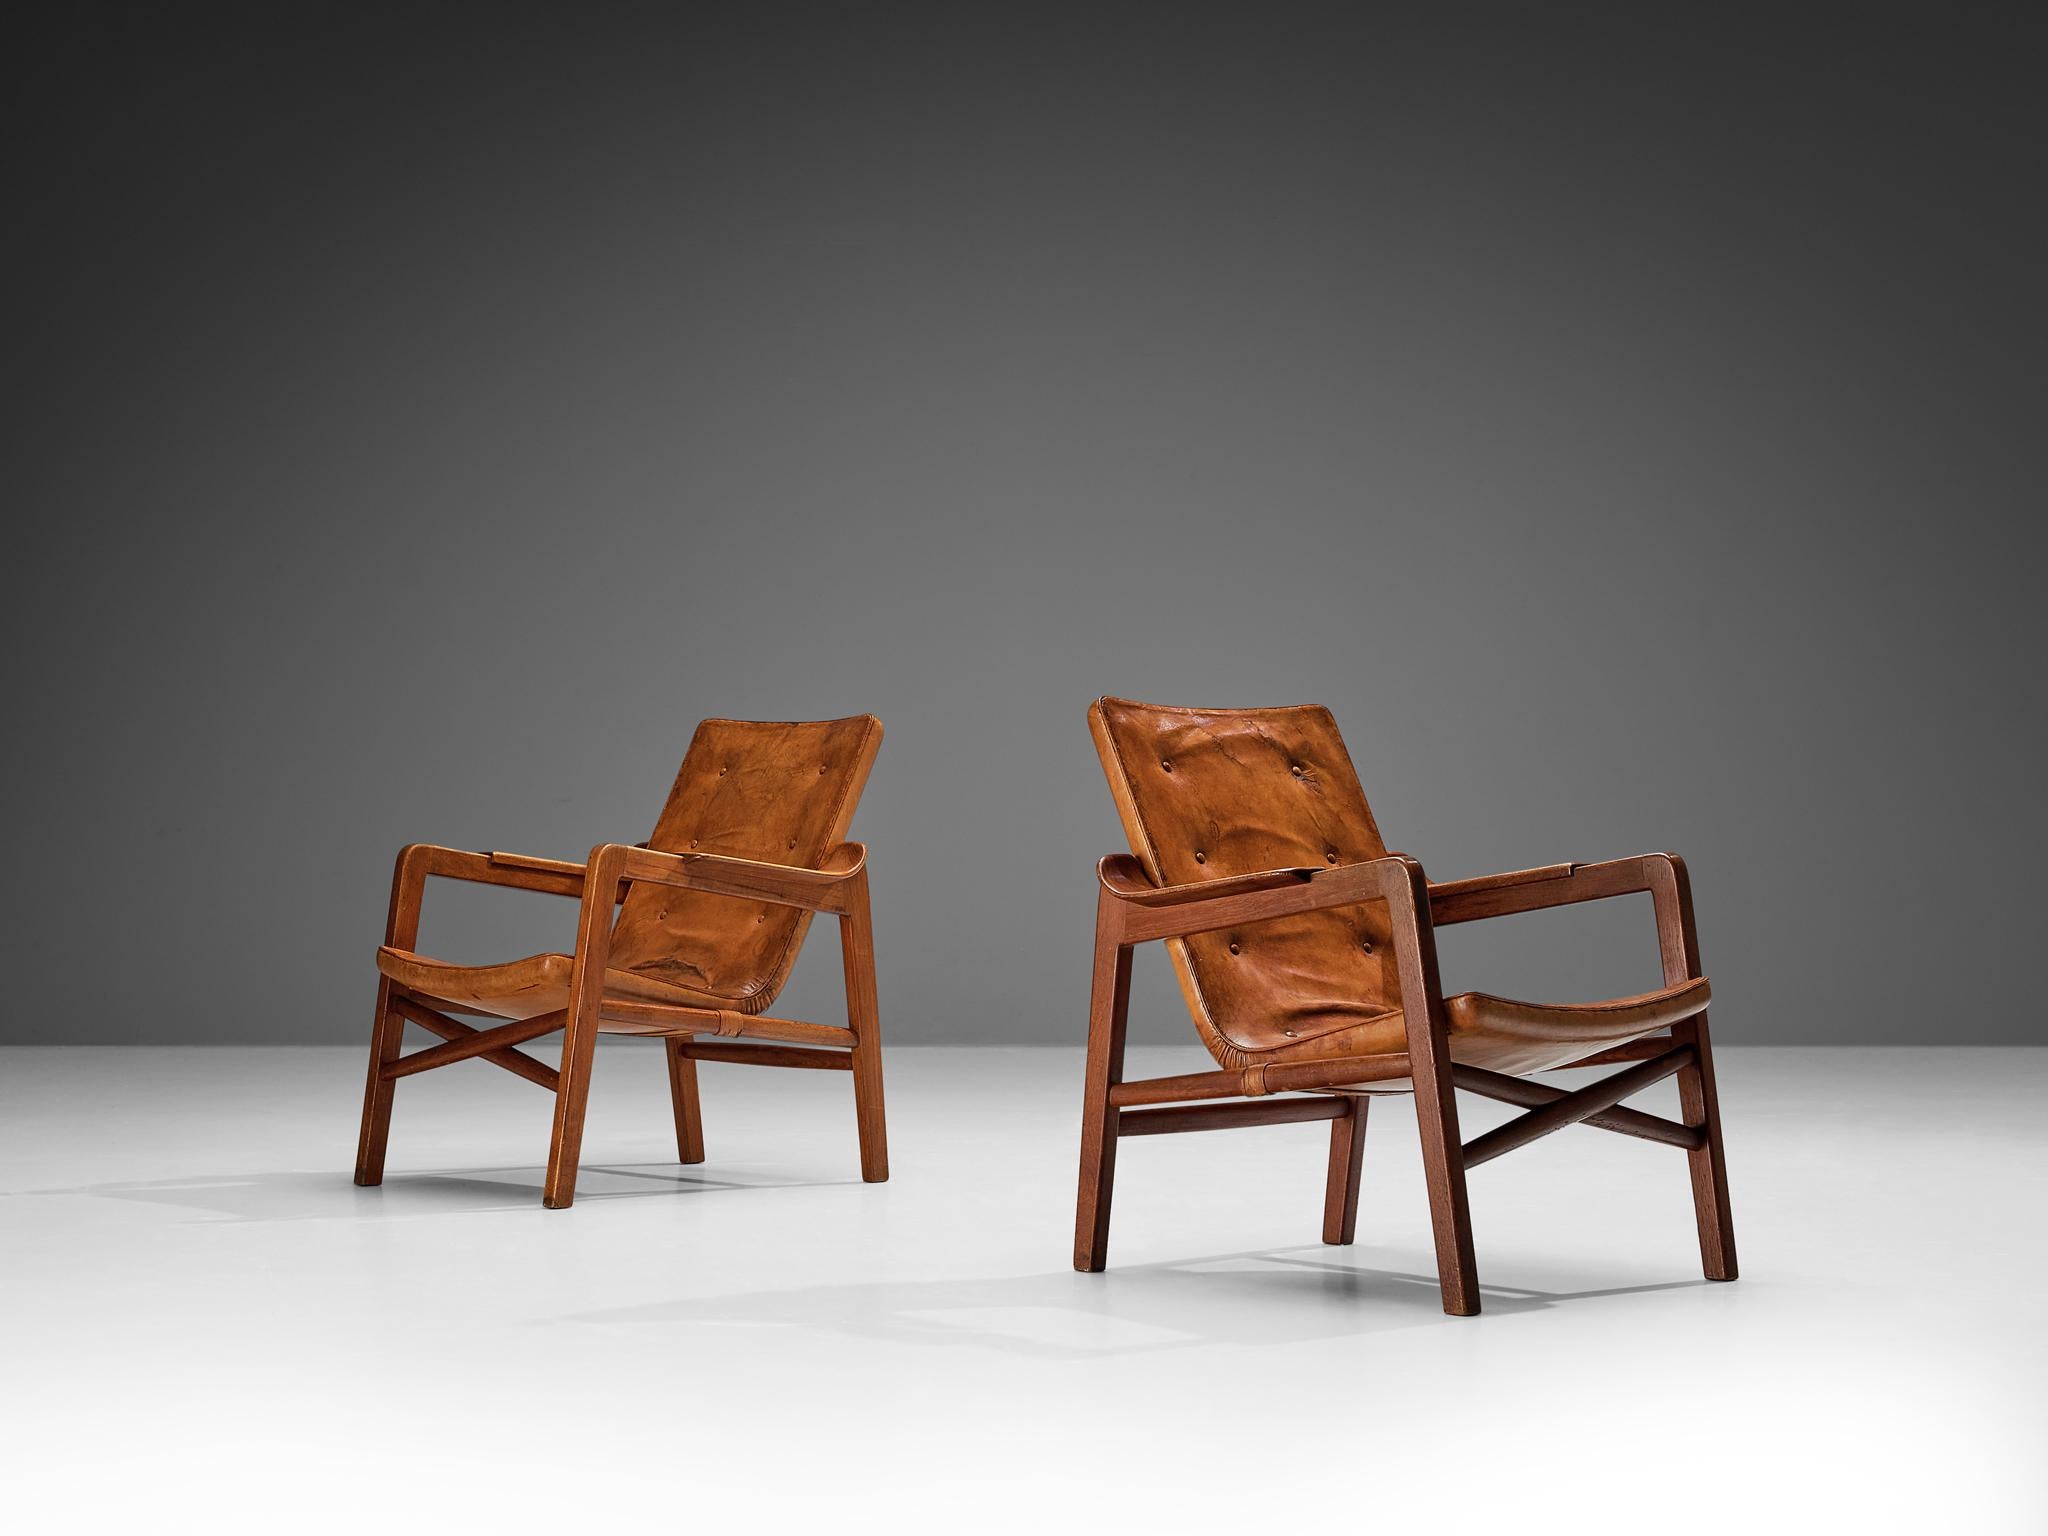 Tove & Edvard Kindt-Larsen for Gustav Bertelsen, pair of lounge chairs 'Fireplace', teak, leather, Denmark, 1940 

These Danish lounge chairs were meticulously crafted for the purpose of accompanying a fireplace, evoking a sense of warmth and